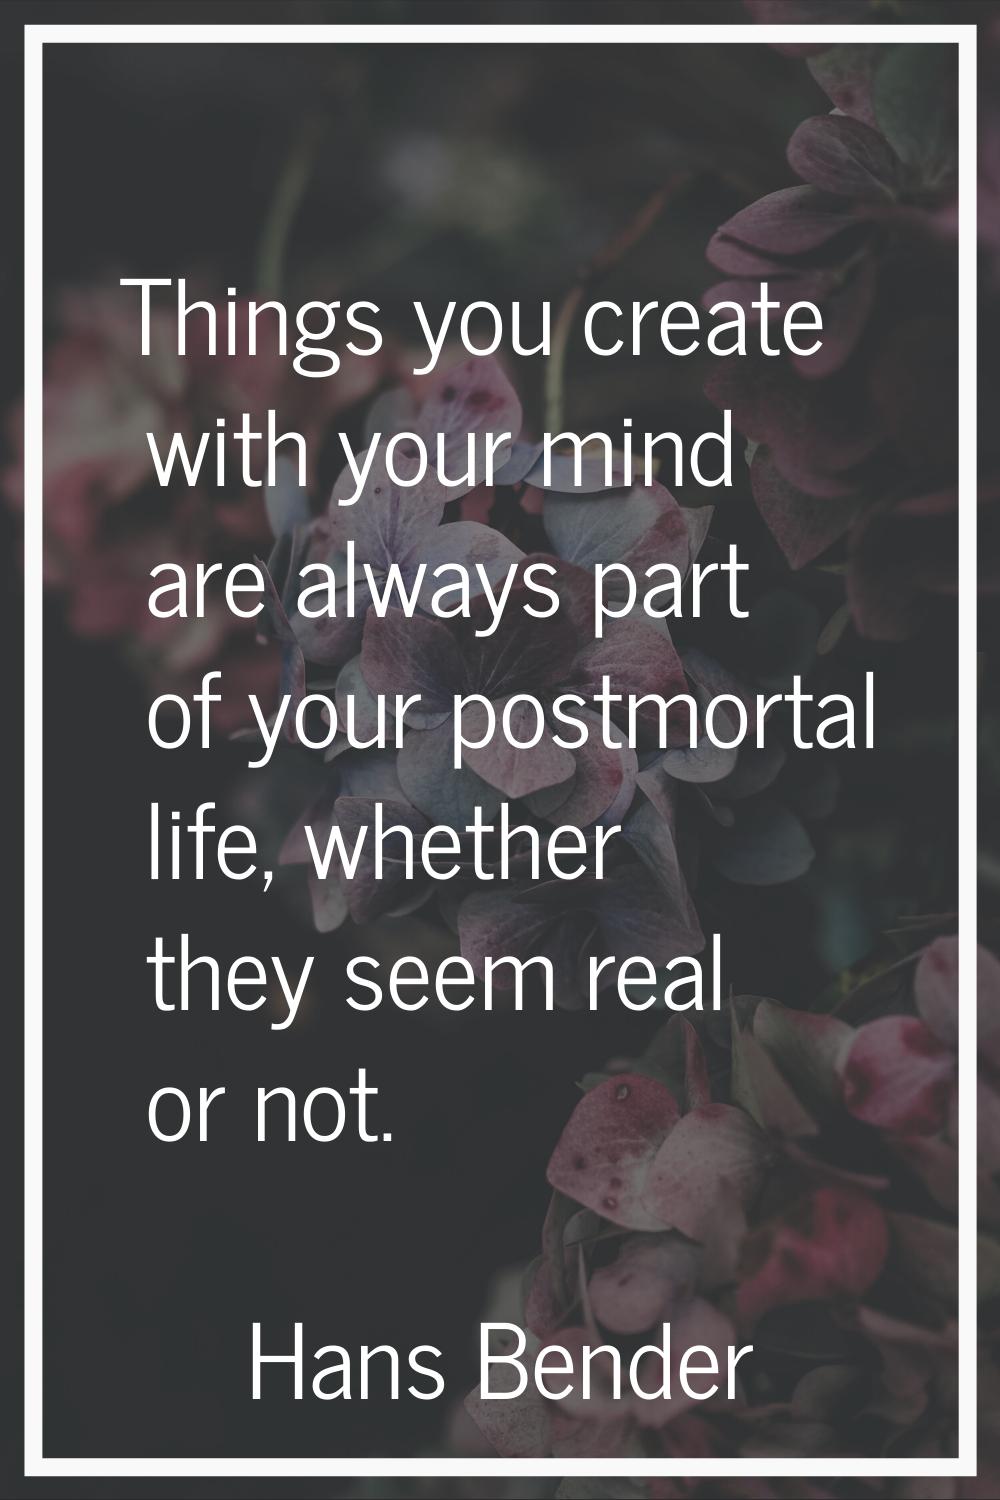 Things you create with your mind are always part of your postmortal life, whether they seem real or